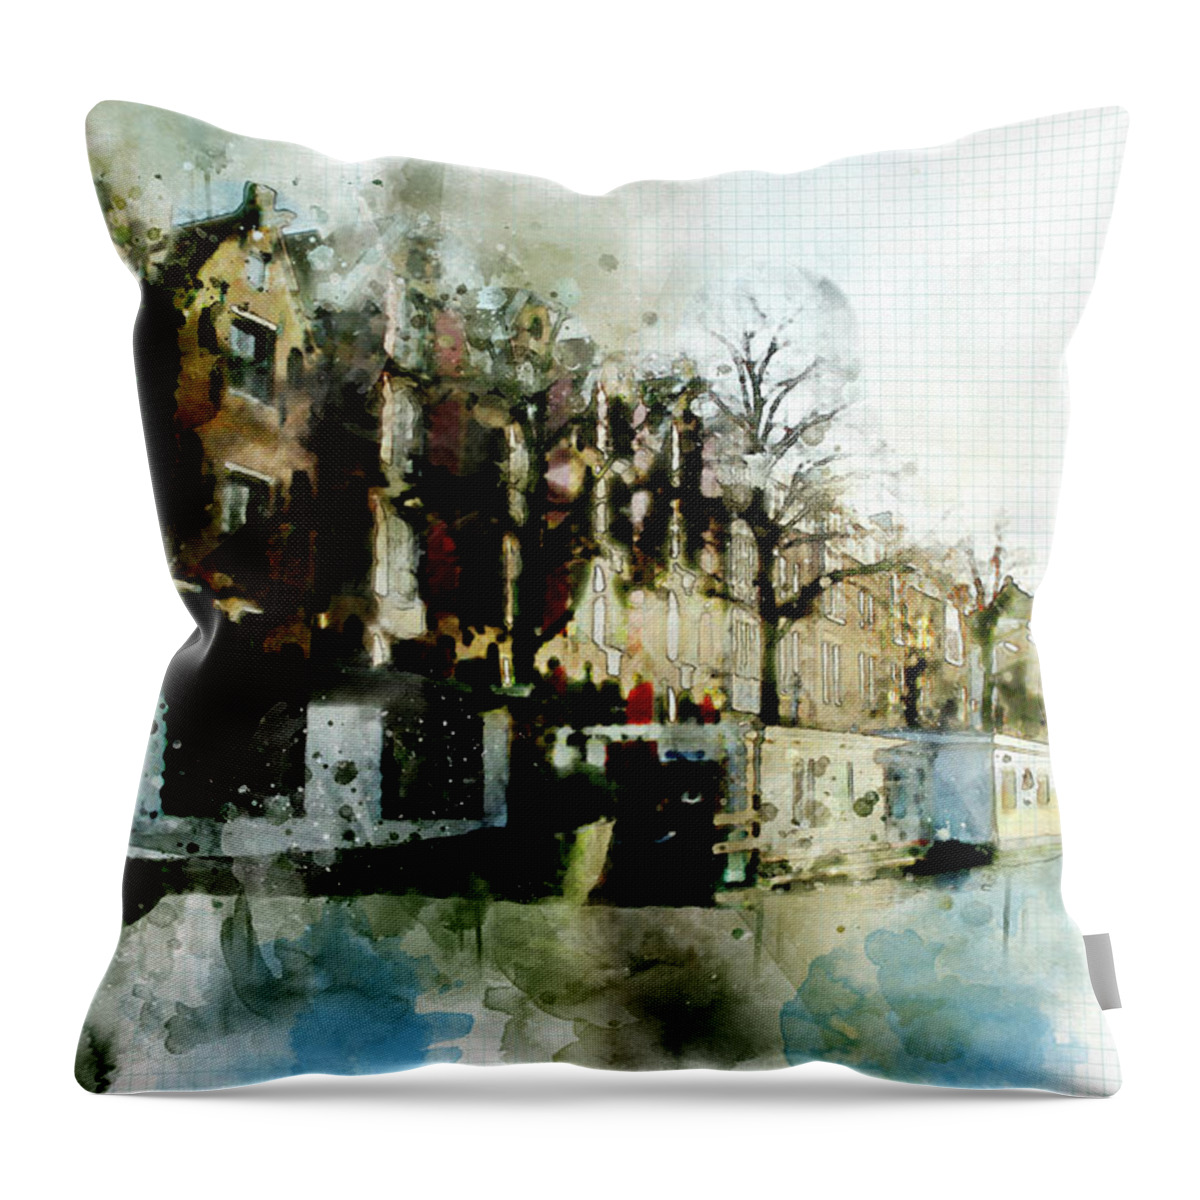 Dutch Throw Pillow featuring the digital art City Life In Watercolor Style #7 by Ariadna De Raadt